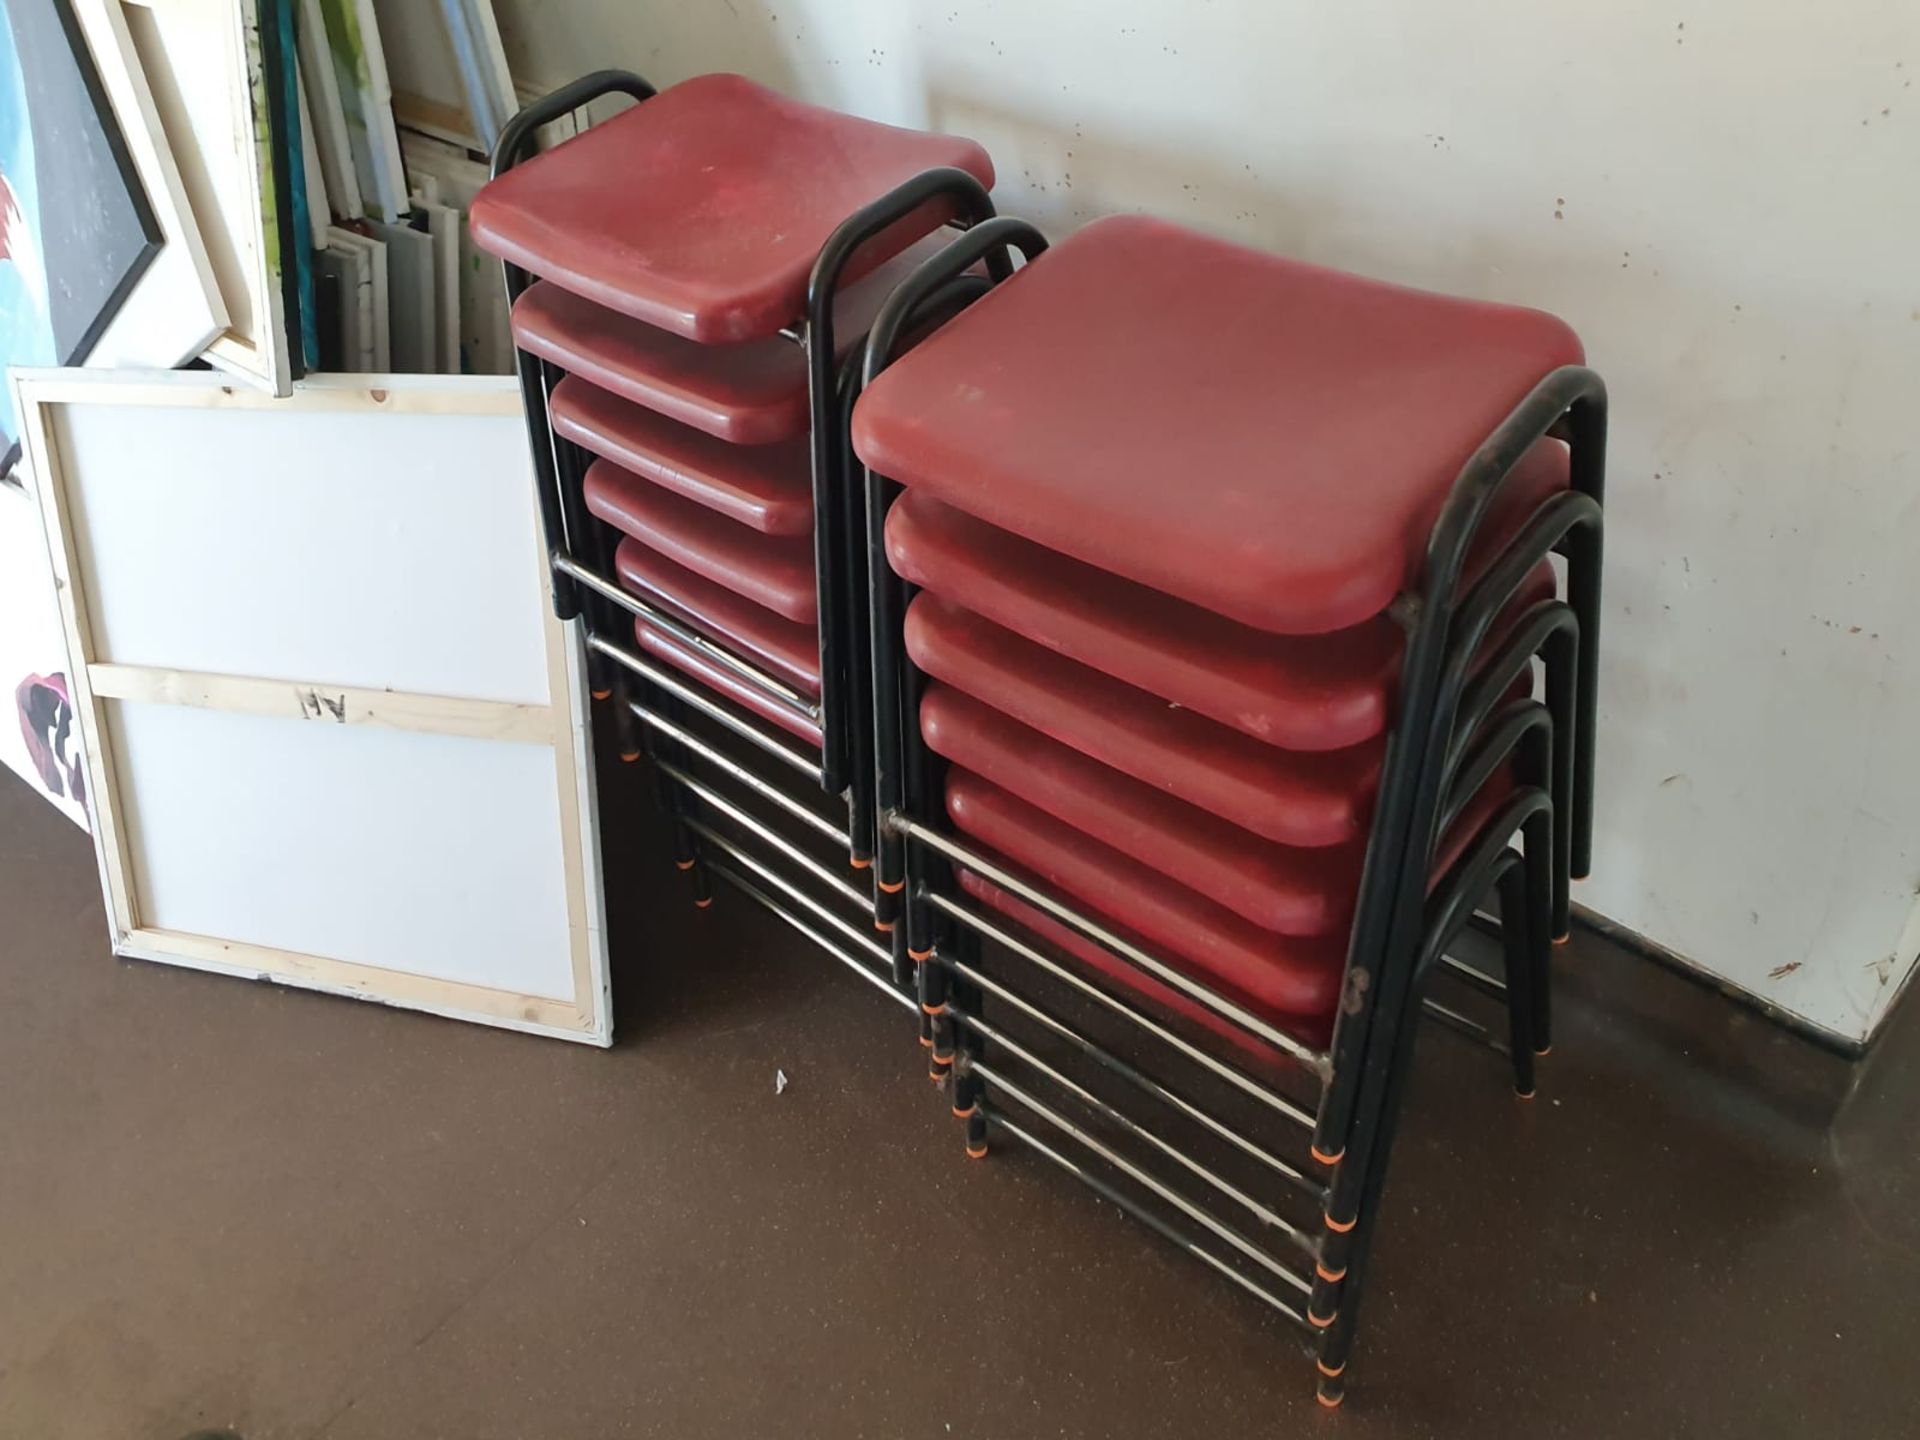 Approx 50 x Red Stackable Seating Stools - Black Metal Frames With Red Seating Pads - CL499 - - Image 2 of 6